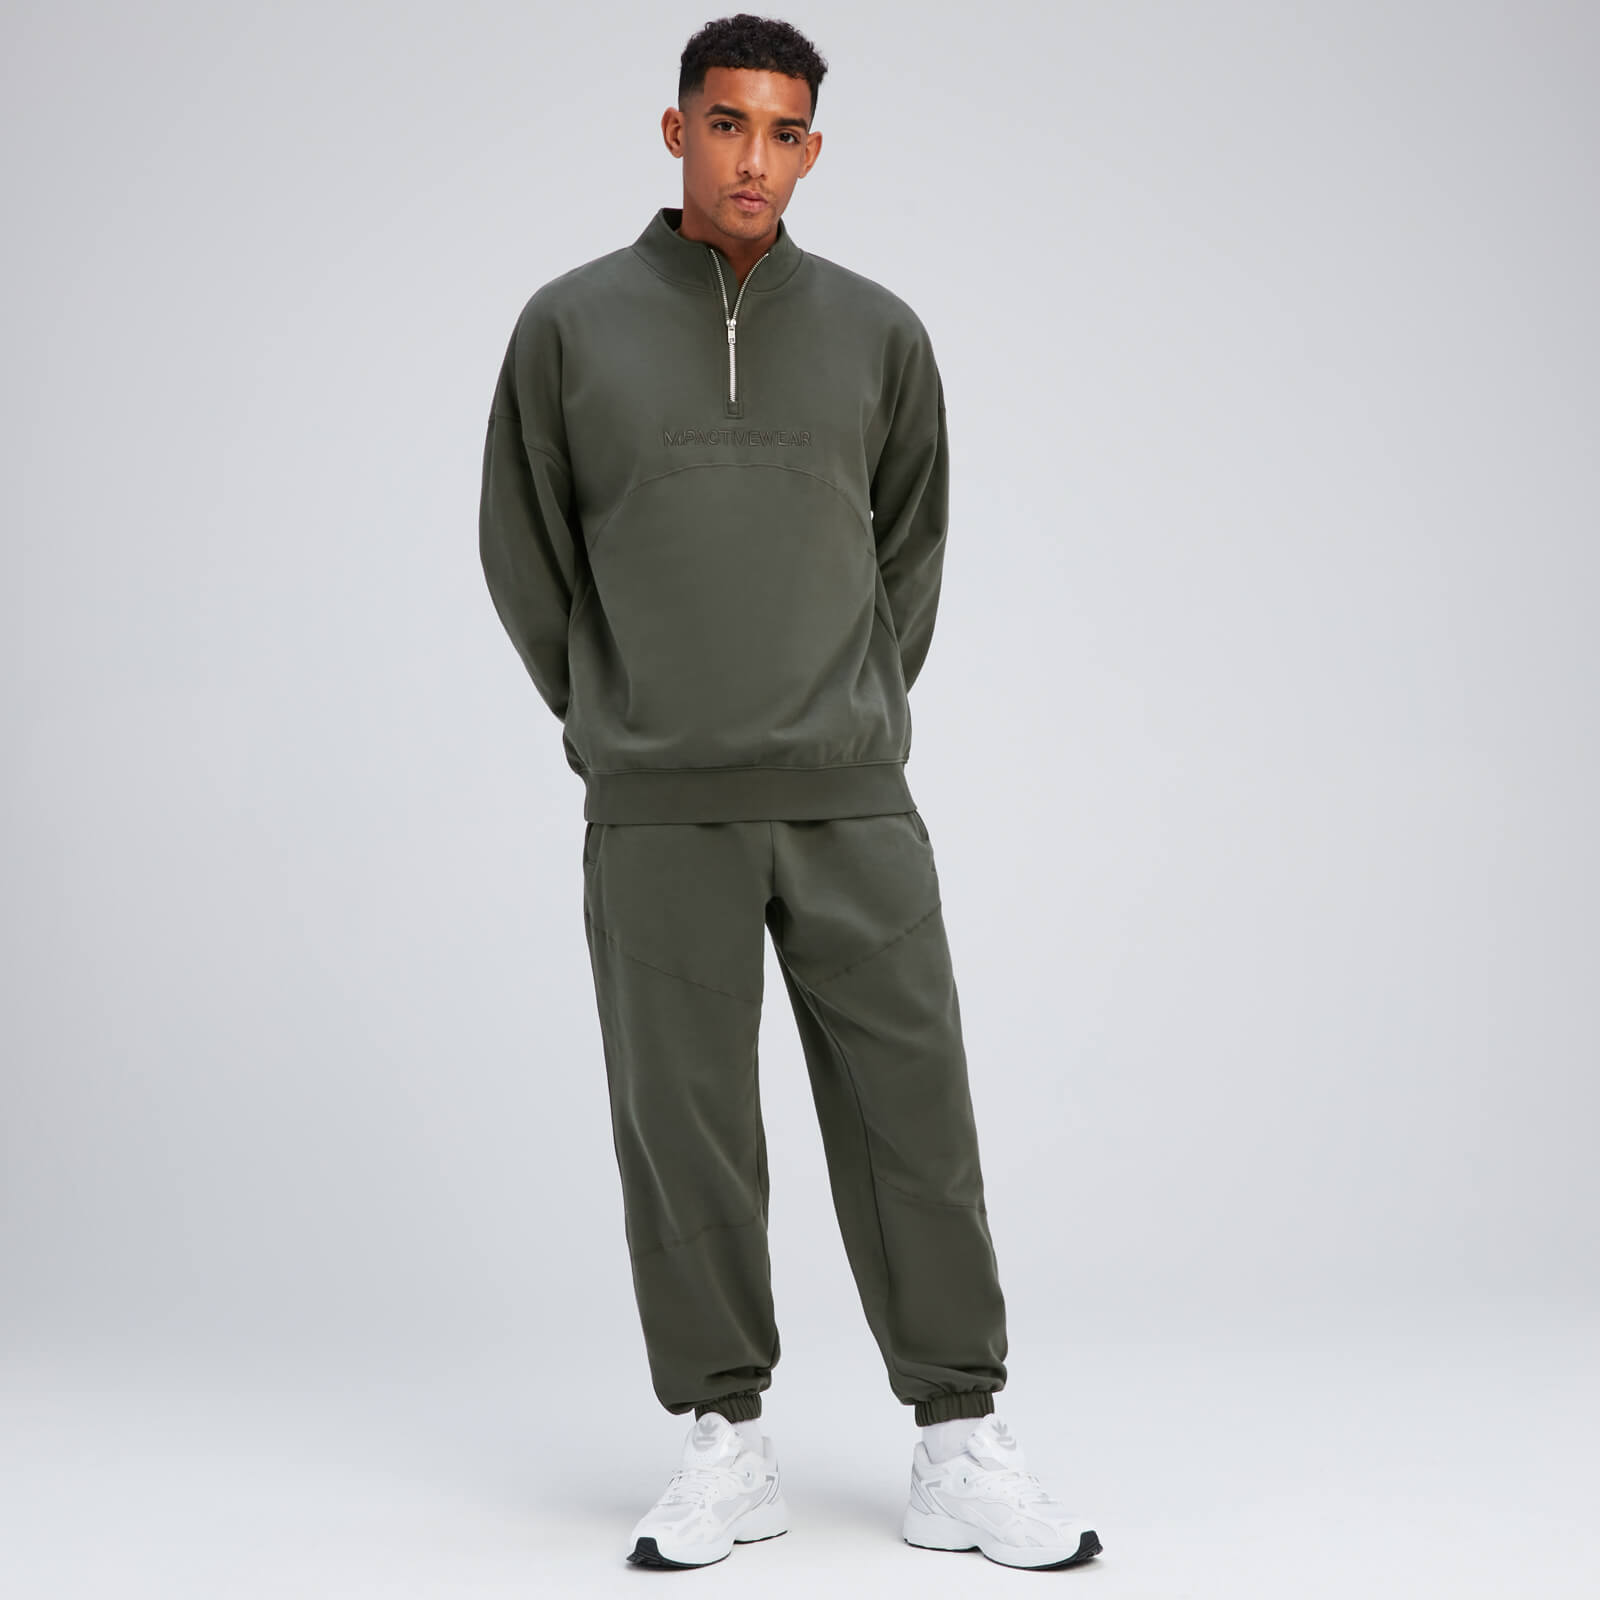 mp men's rest day 1/4 zip - taupe green - s